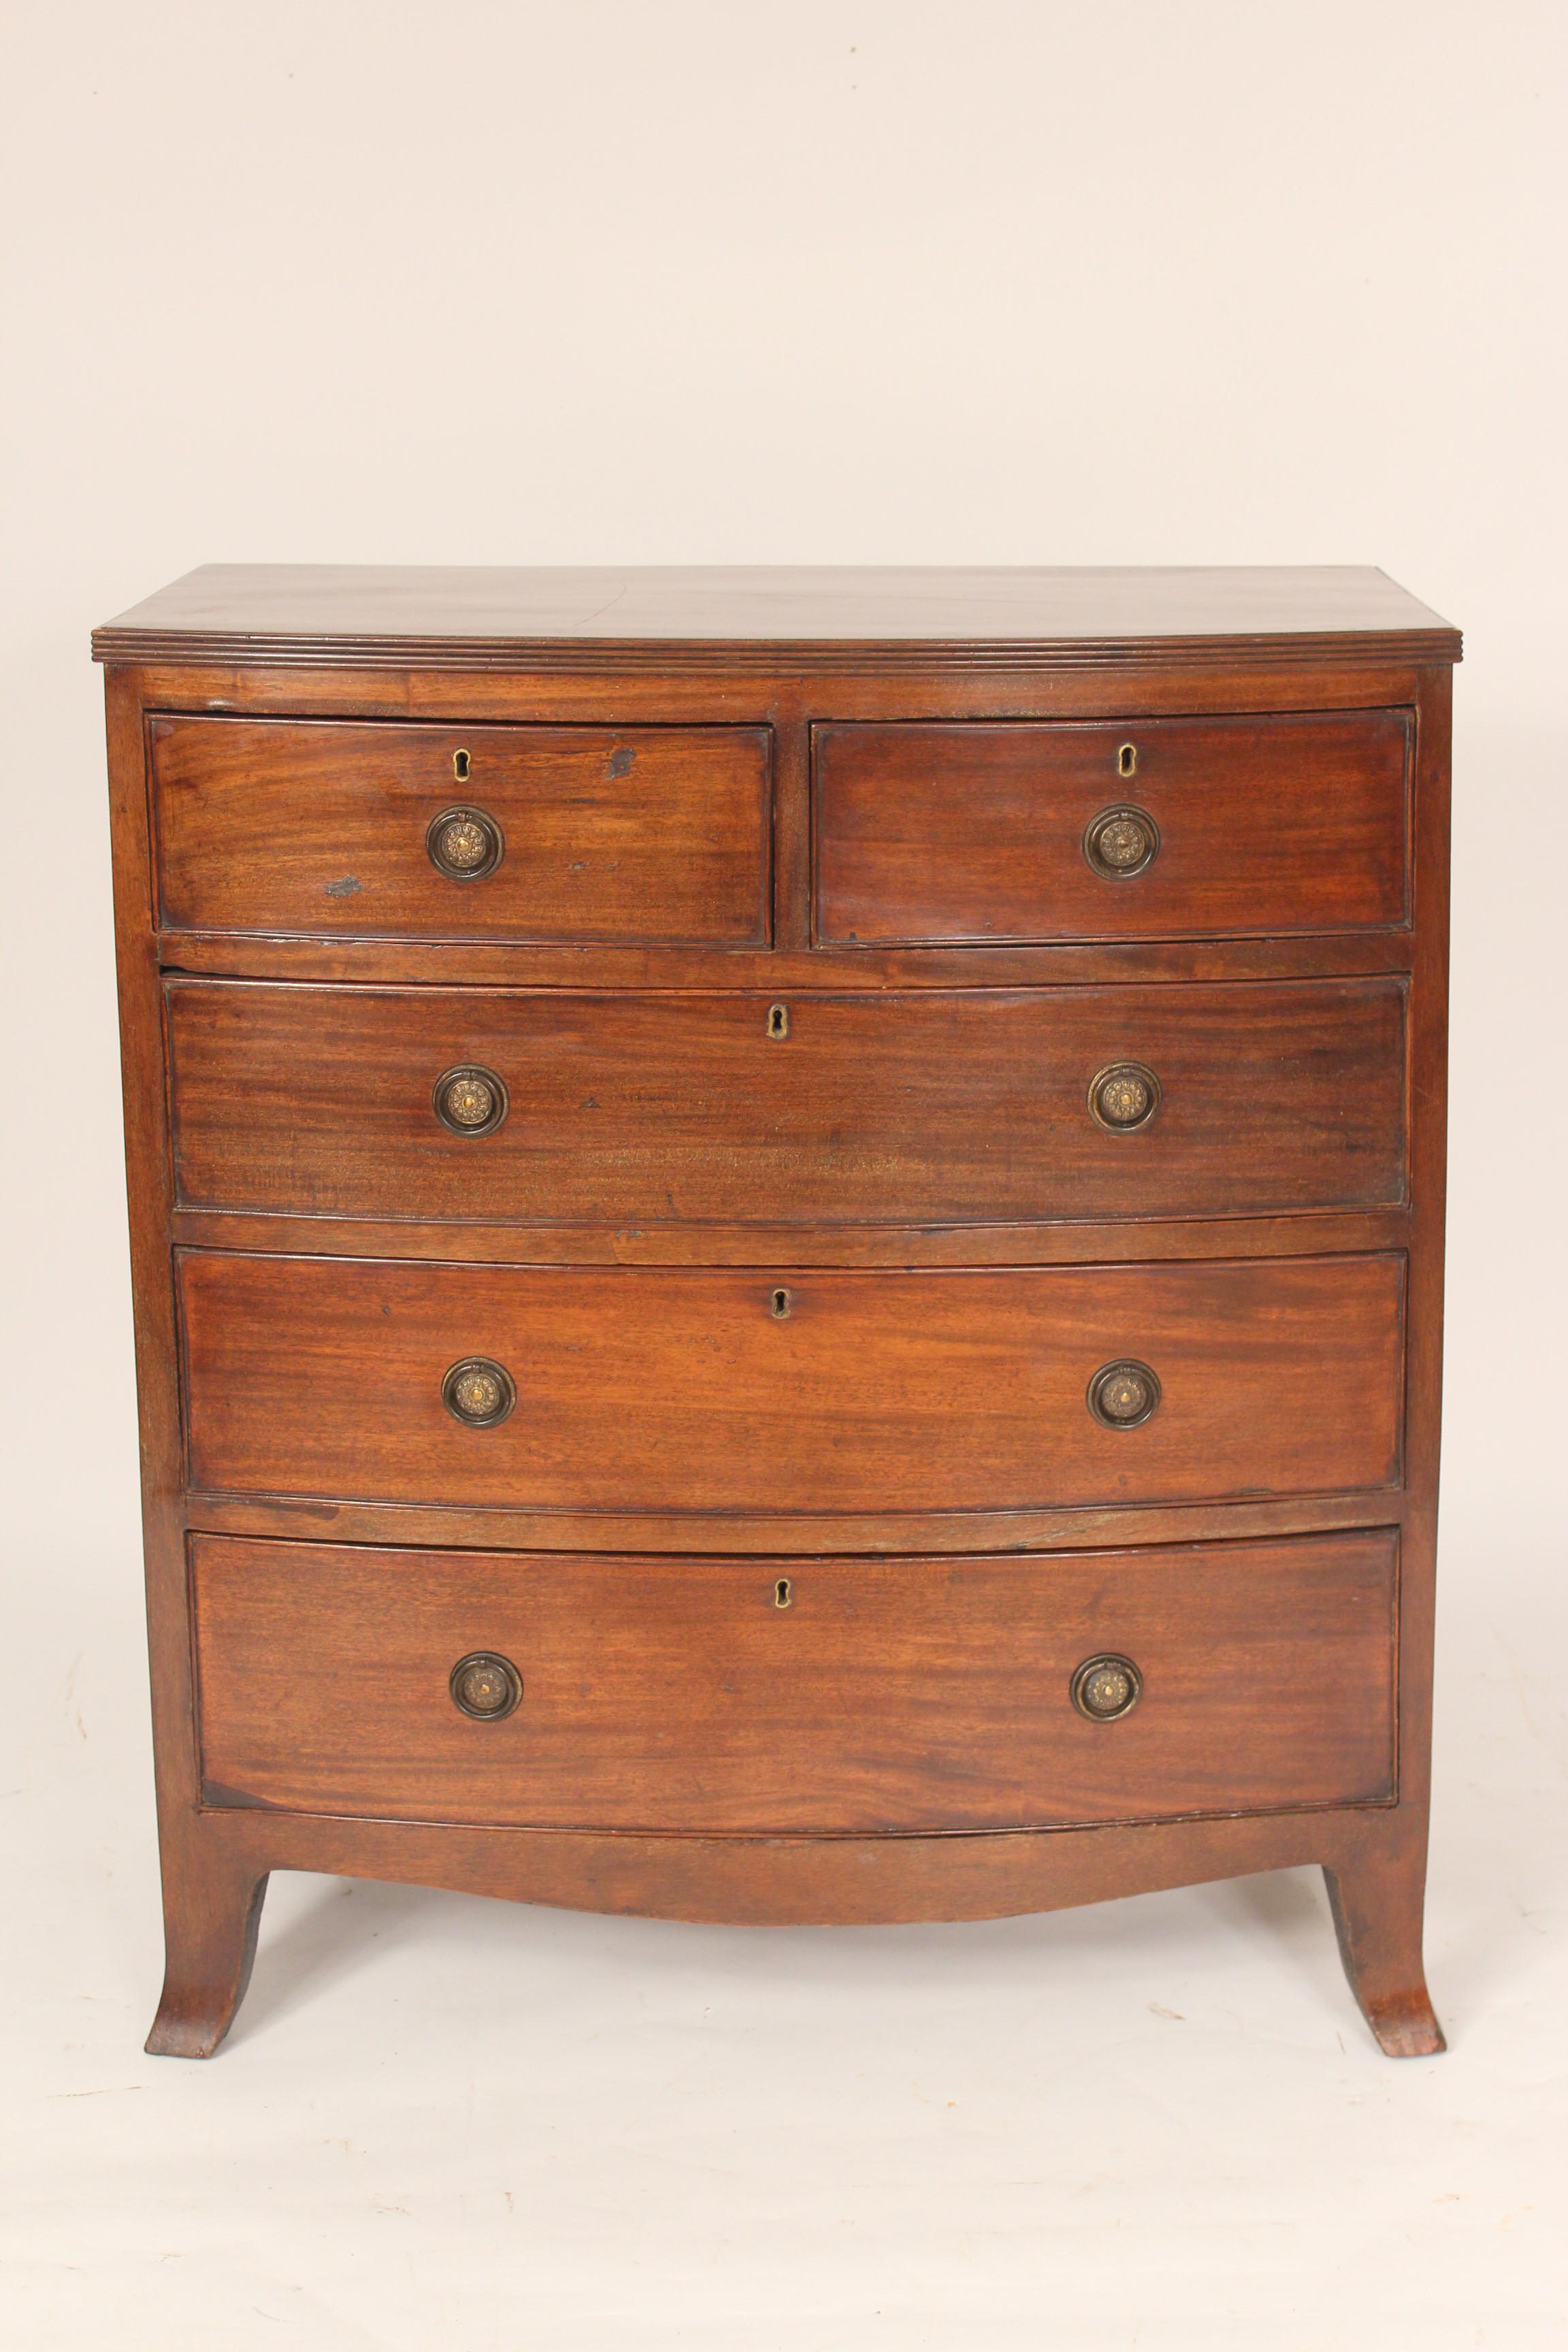 Antique George III style mahogany bow front chest of drawers, late 19th century. With nice old color and brass hardware.